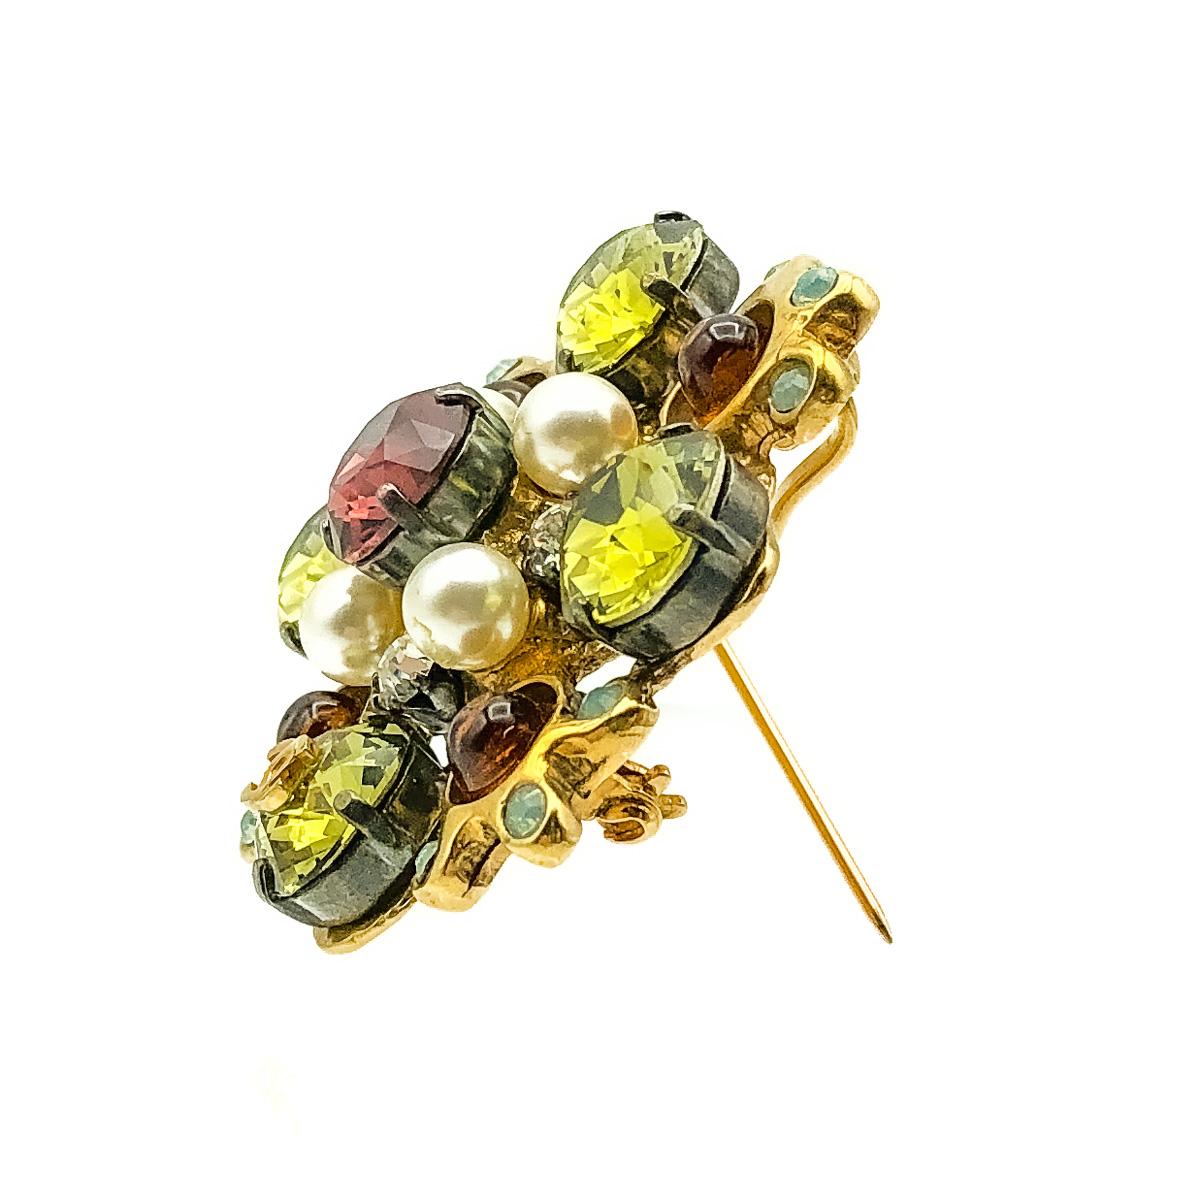 A beautiful Chanel Crystal Brooch from 2005.Designed in a Byzantine style. Featuring four large green faceted crystals interspersed with an equally impressive array of stones. Including whole faux pearls, burnt orange poured glass stones, white